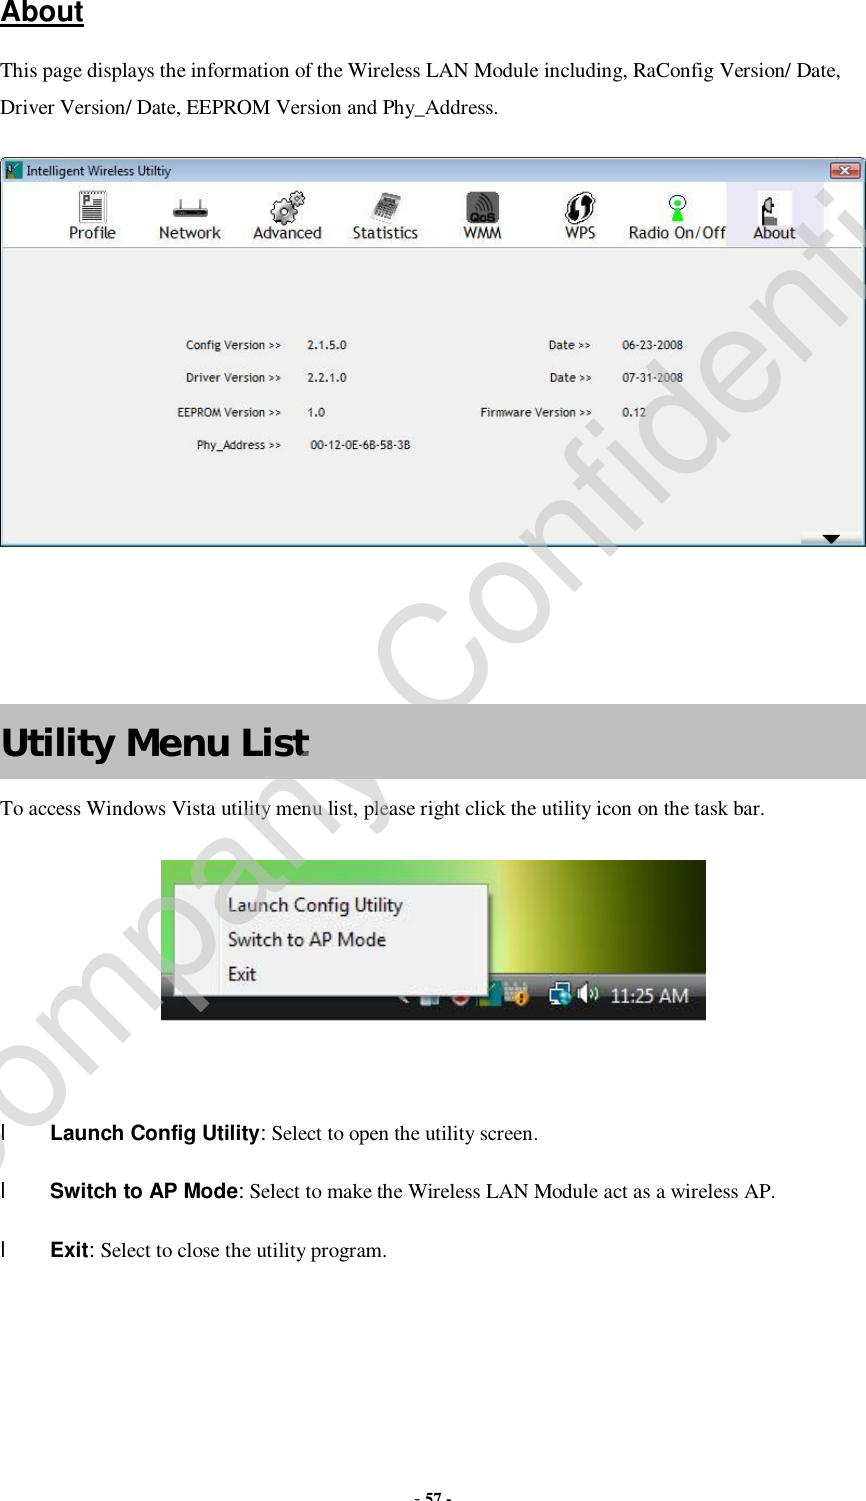  - 57 -  About This page displays the information of the Wireless LAN Module including, RaConfig Version/ Date, Driver Version/ Date, EEPROM Version and Phy_Address.     Utility Menu List To access Windows Vista utility menu list, please right click the utility icon on the task bar.   l Launch Config Utility: Select to open the utility screen. l Switch to AP Mode: Select to make the Wireless LAN Module act as a wireless AP. l Exit: Select to close the utility program.   Company Confidential